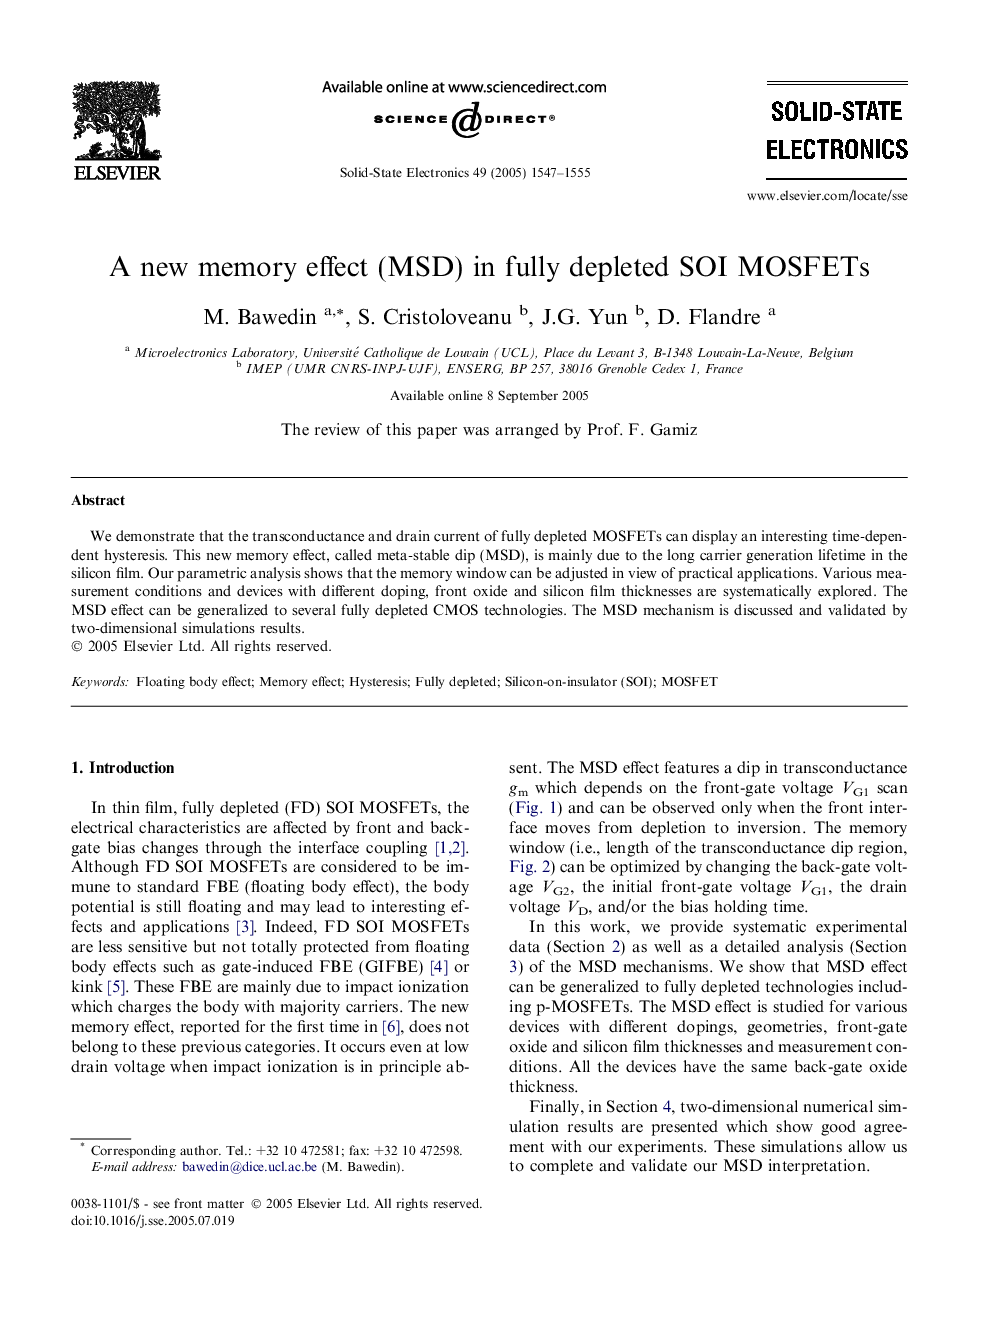 A new memory effect (MSD) in fully depleted SOI MOSFETs